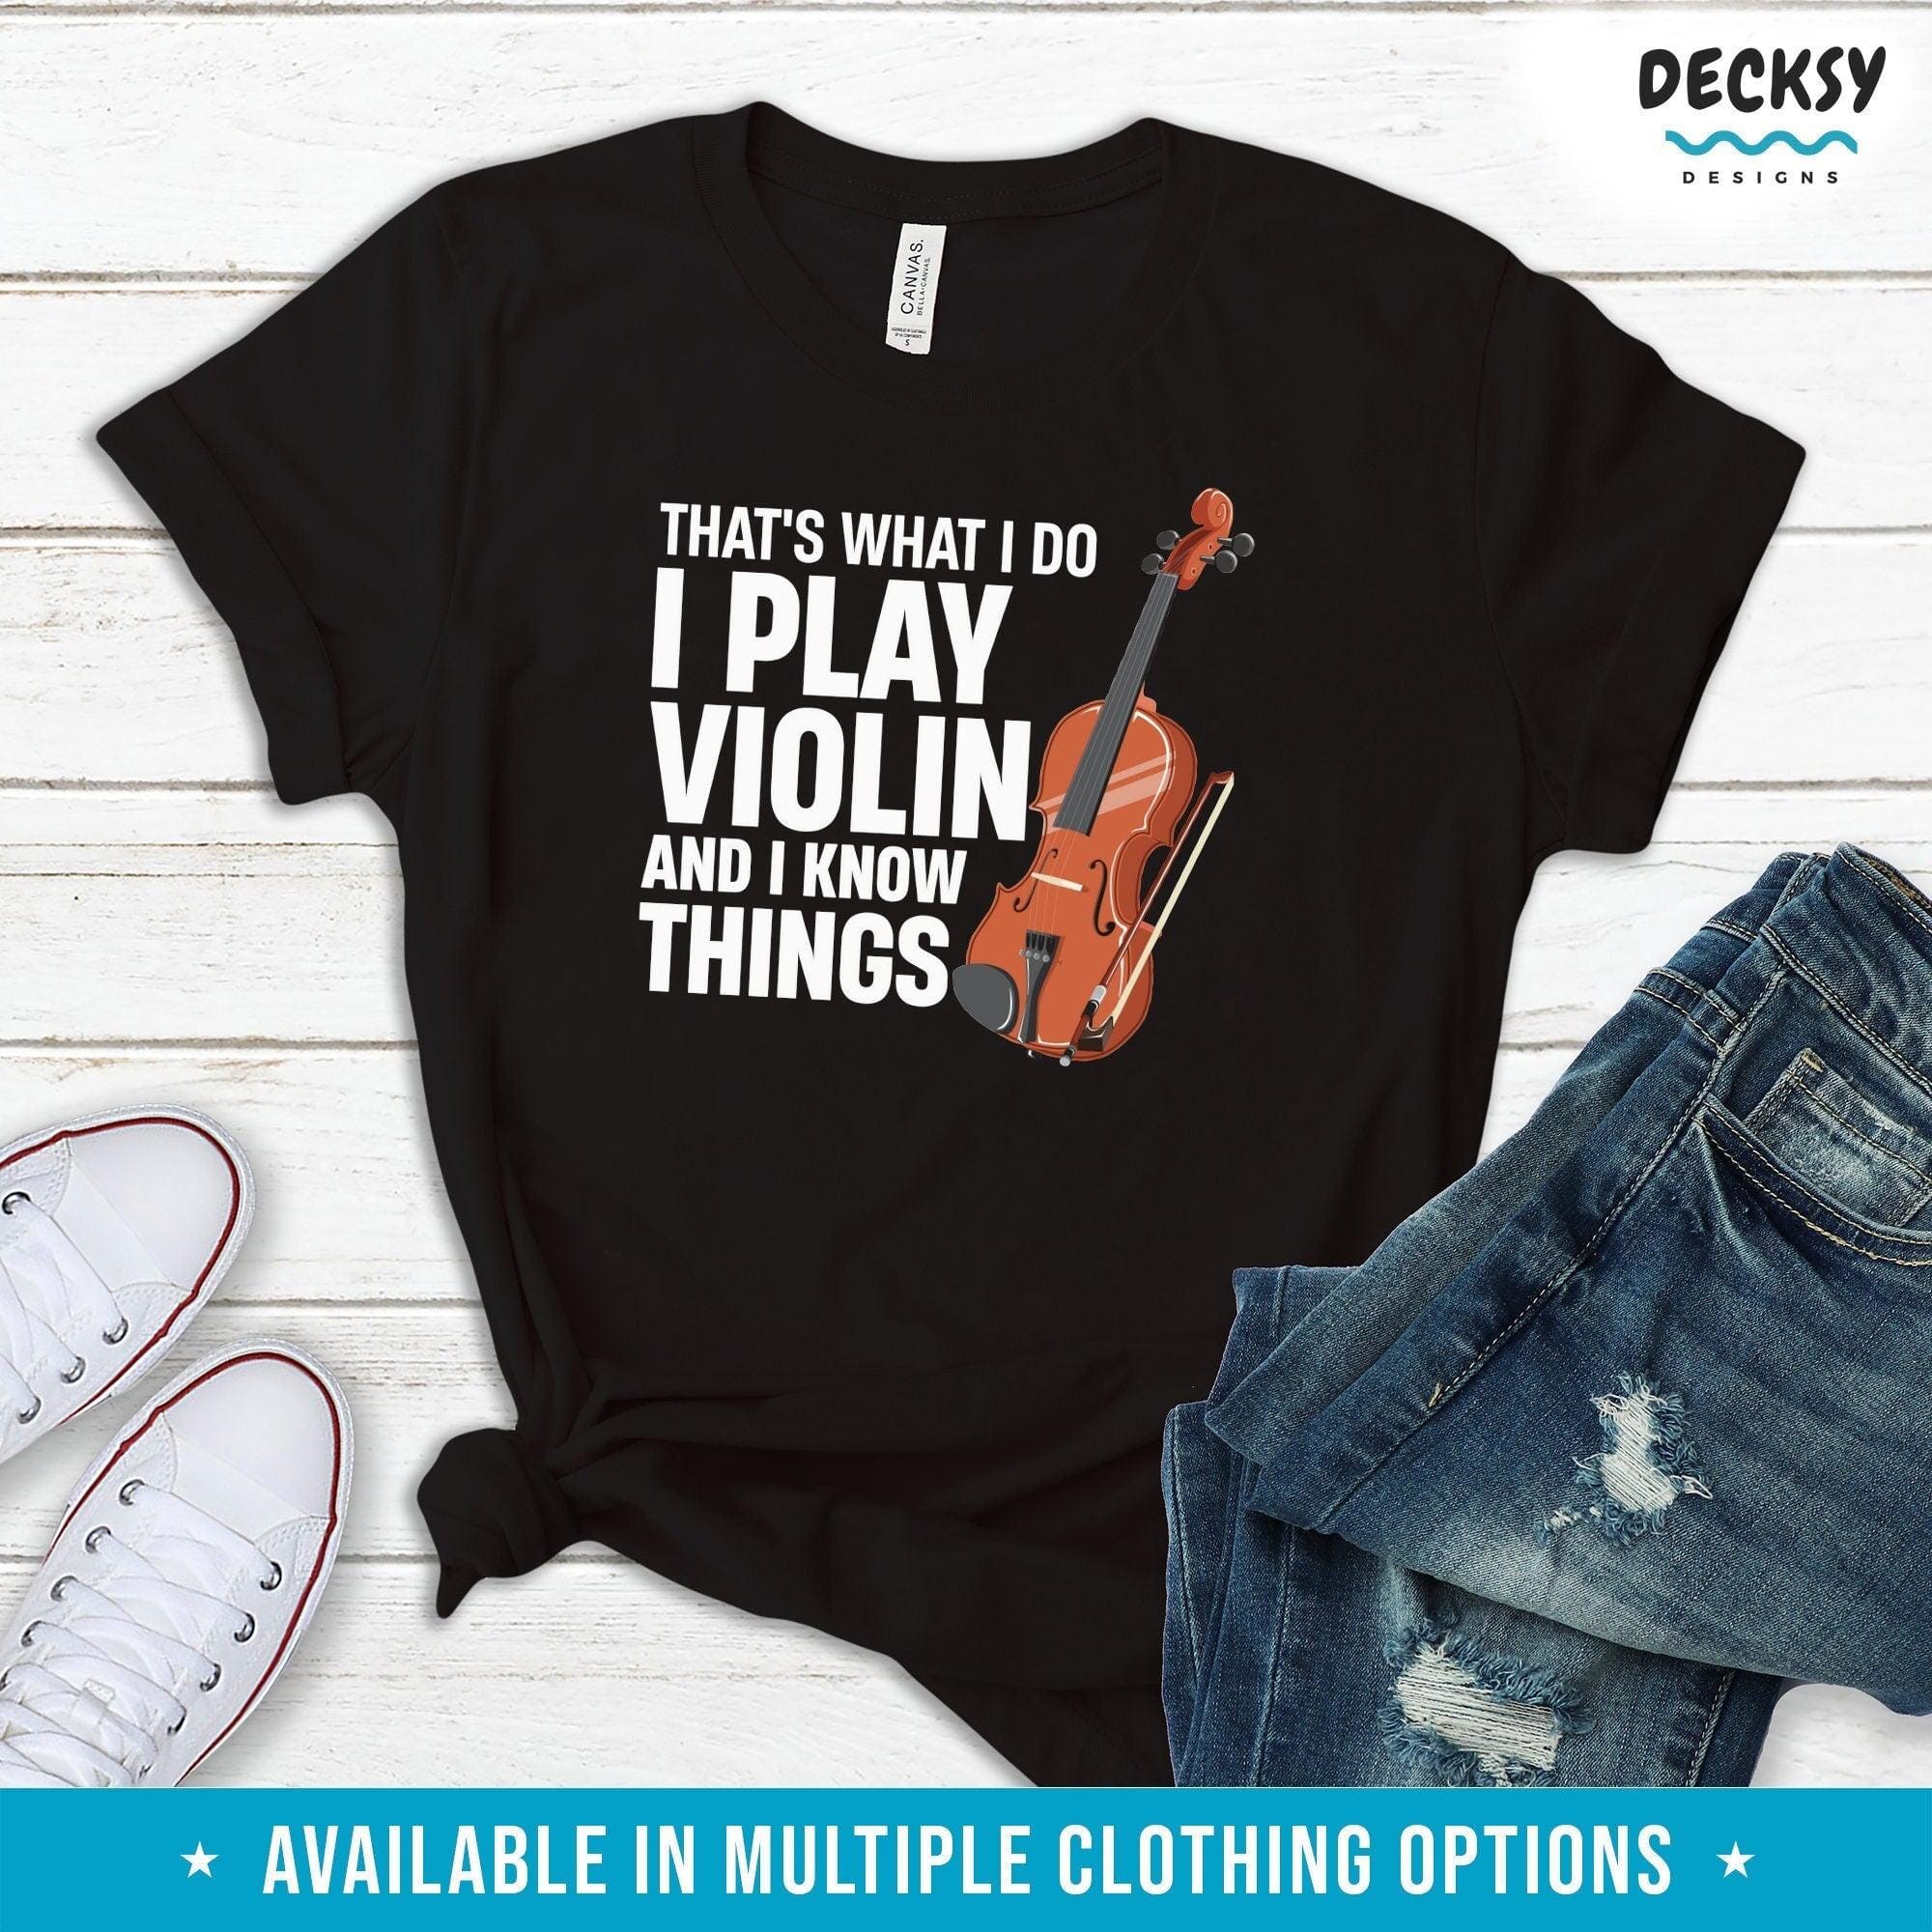 Violin Player Tshirt, Gift For Violinist-Clothing:Gender-Neutral Adult Clothing:Tops & Tees:T-shirts:Graphic Tees-DecksyDesigns